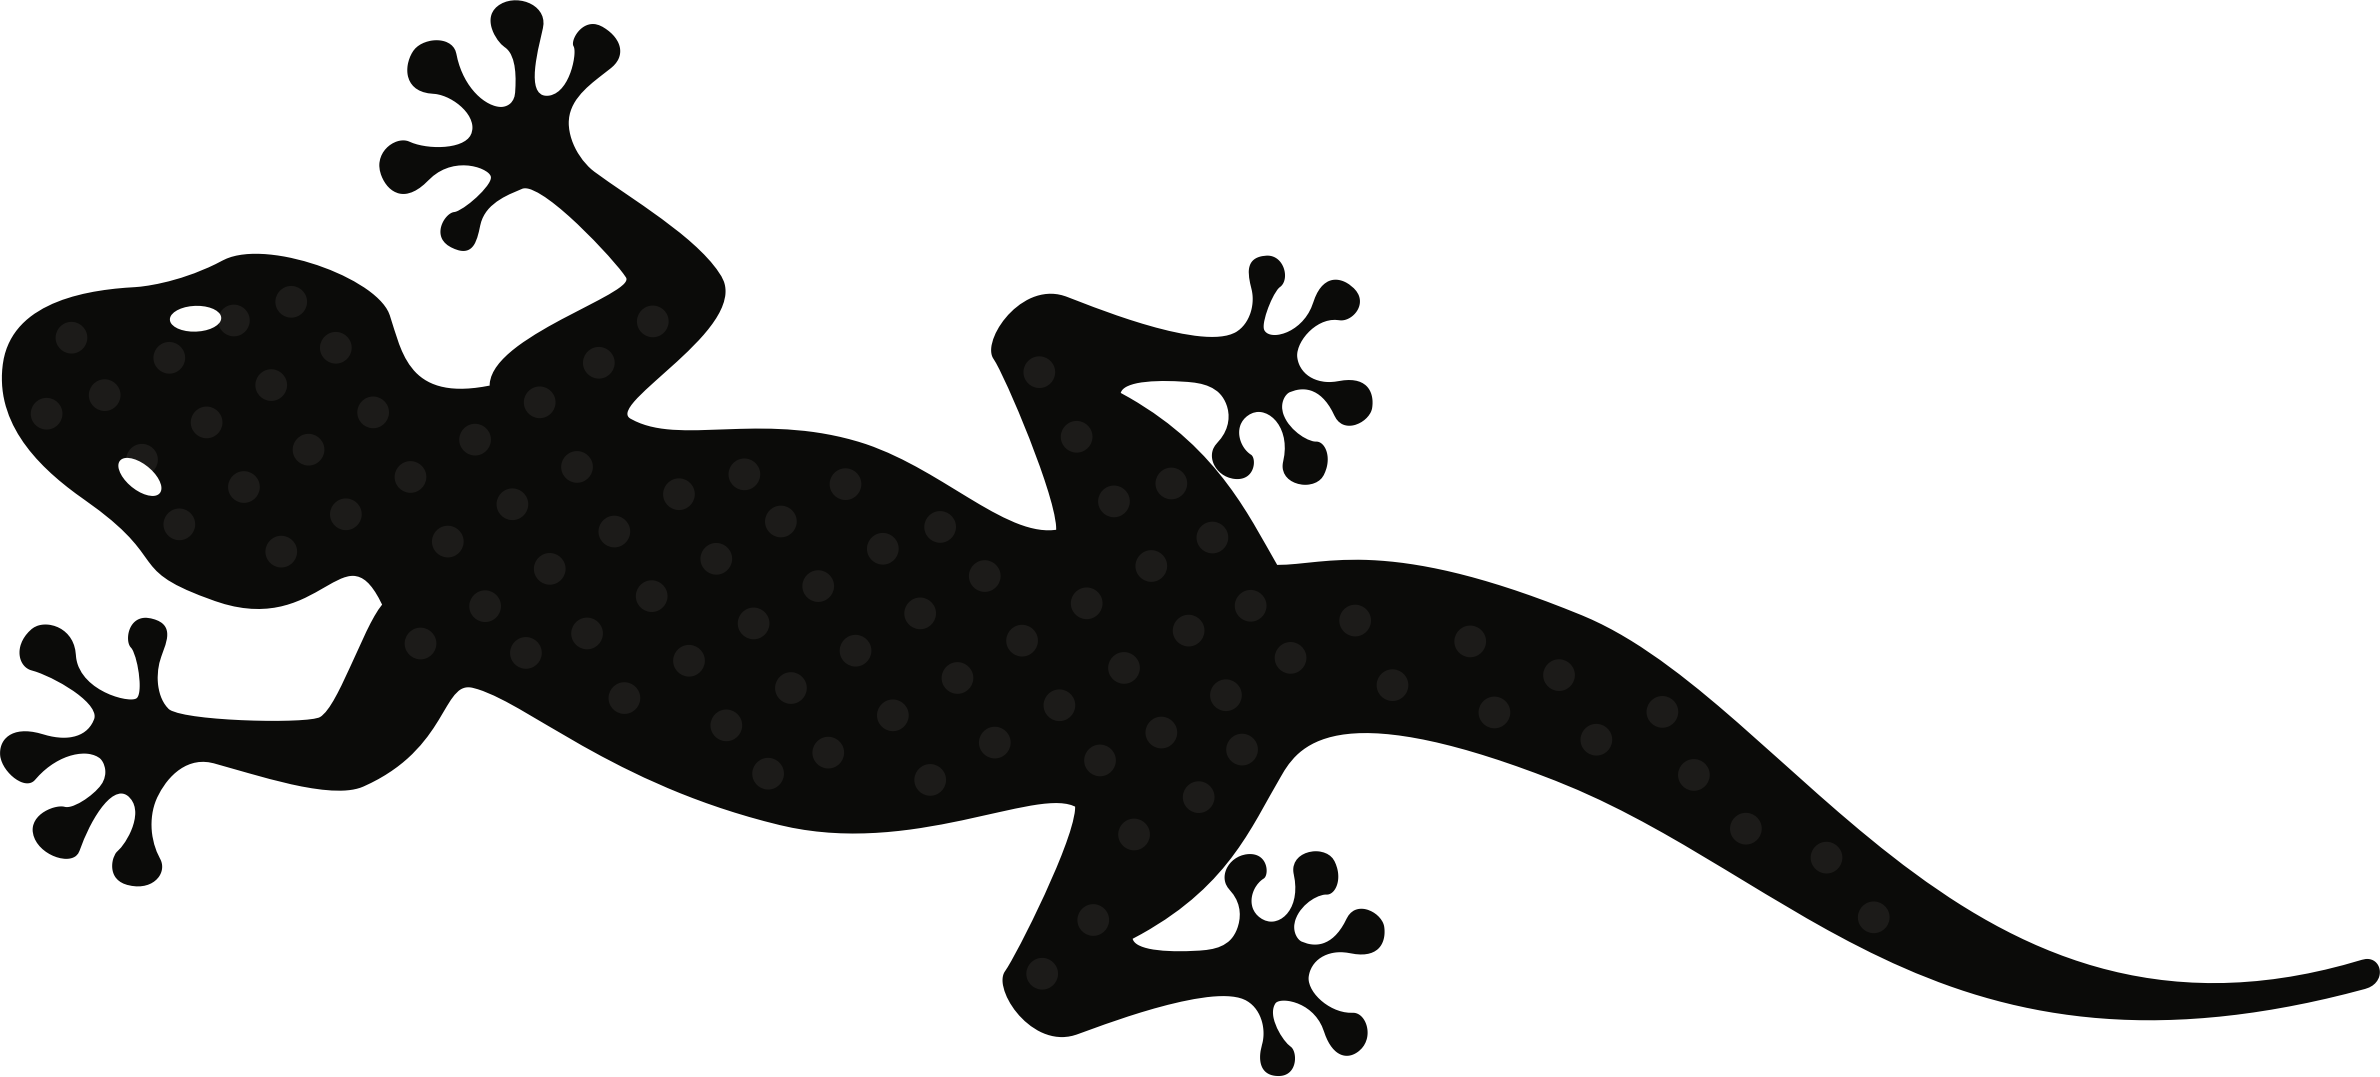 A Black Lizard With White Dots